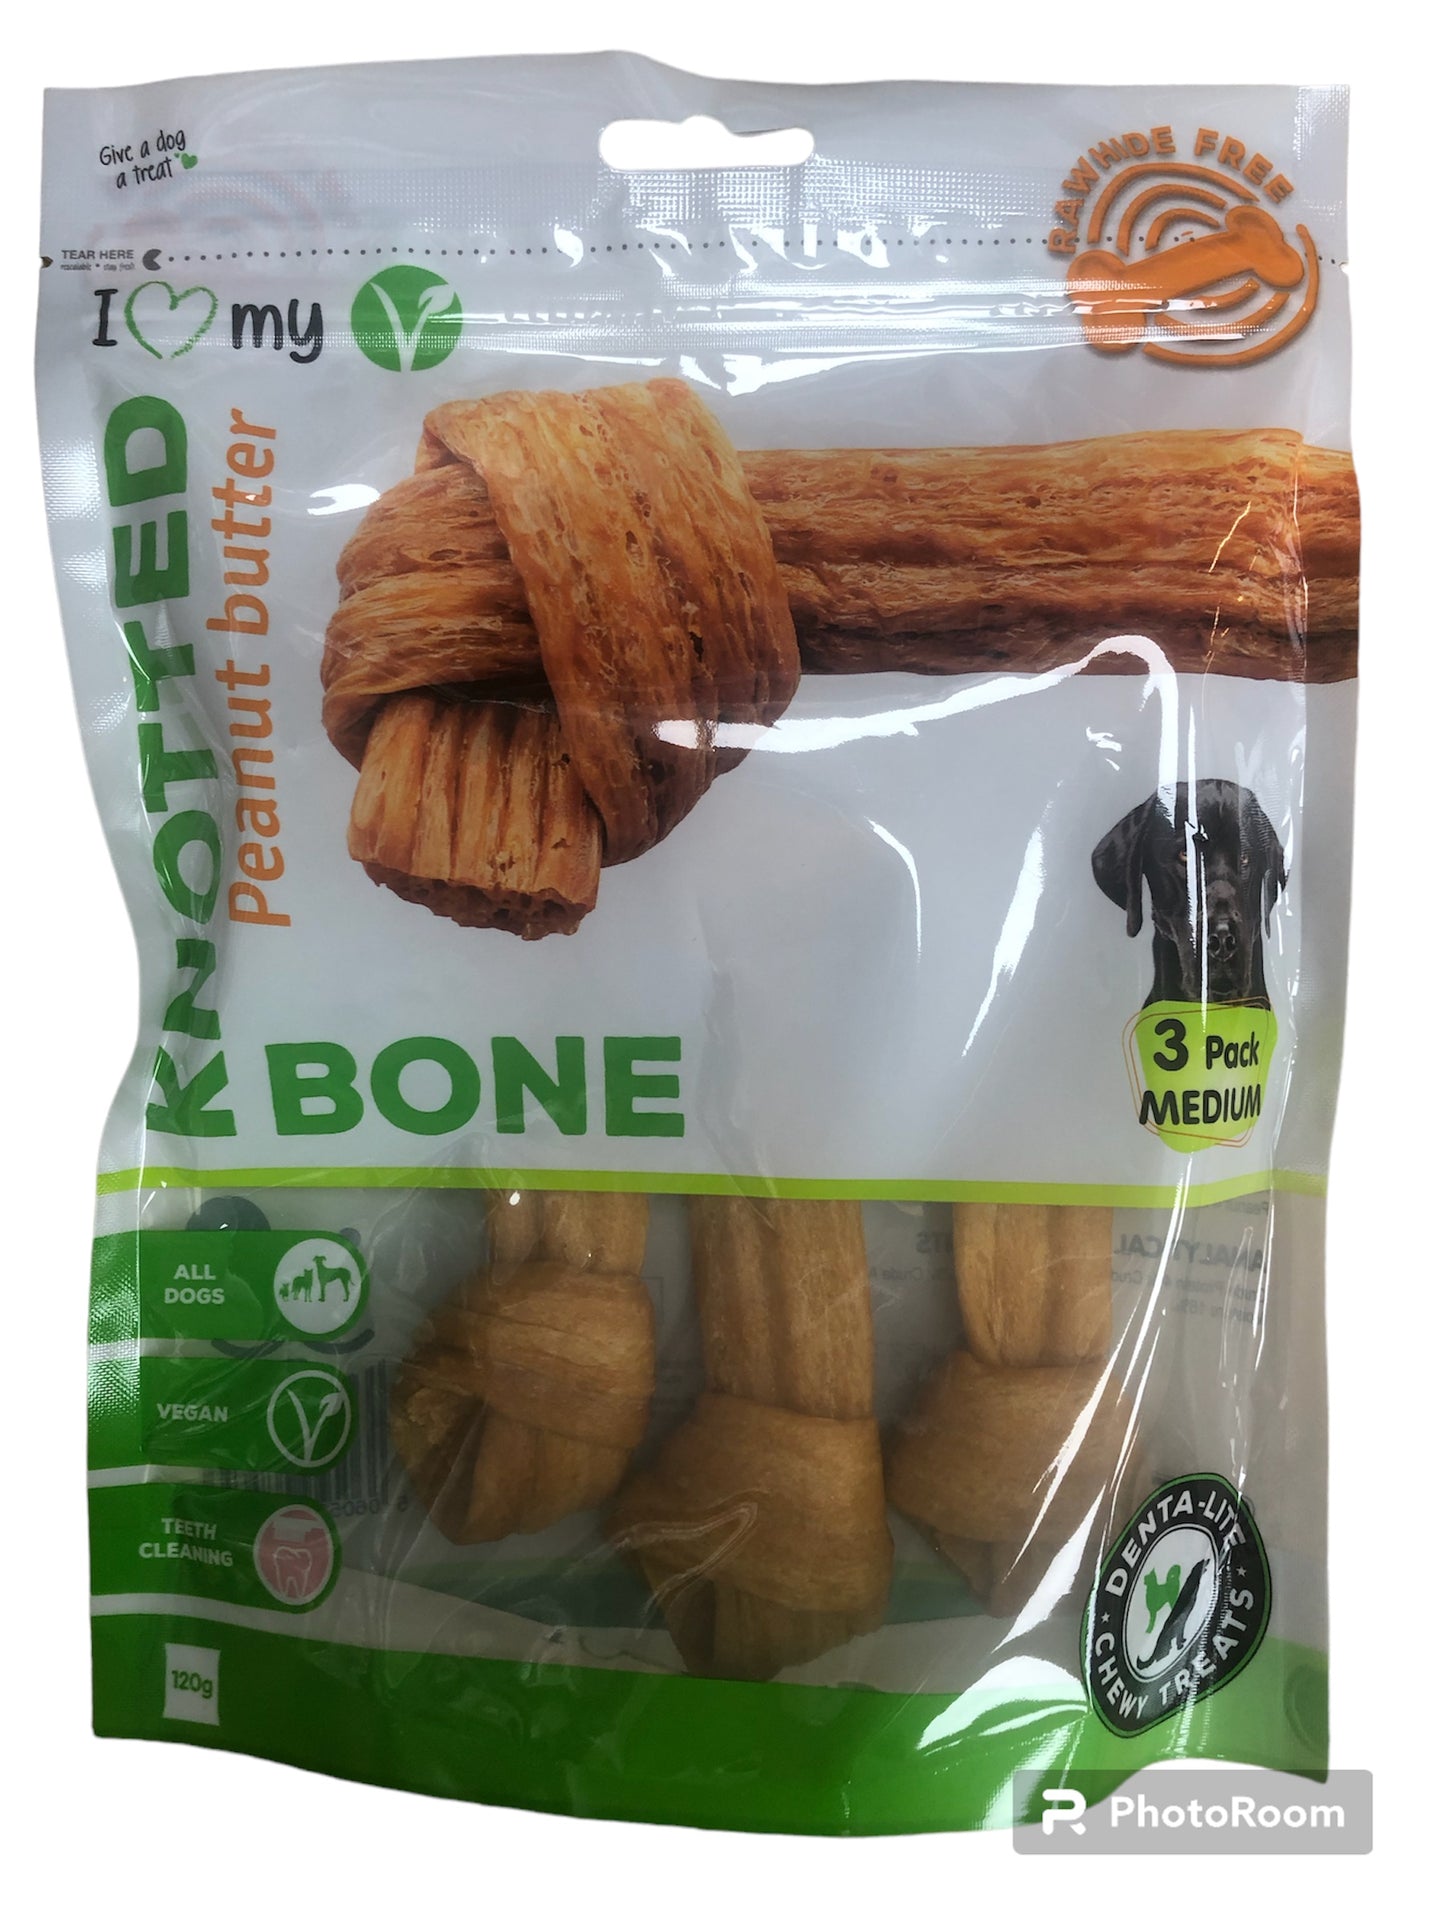 Knotted peanut butter bones x 3 total 120g